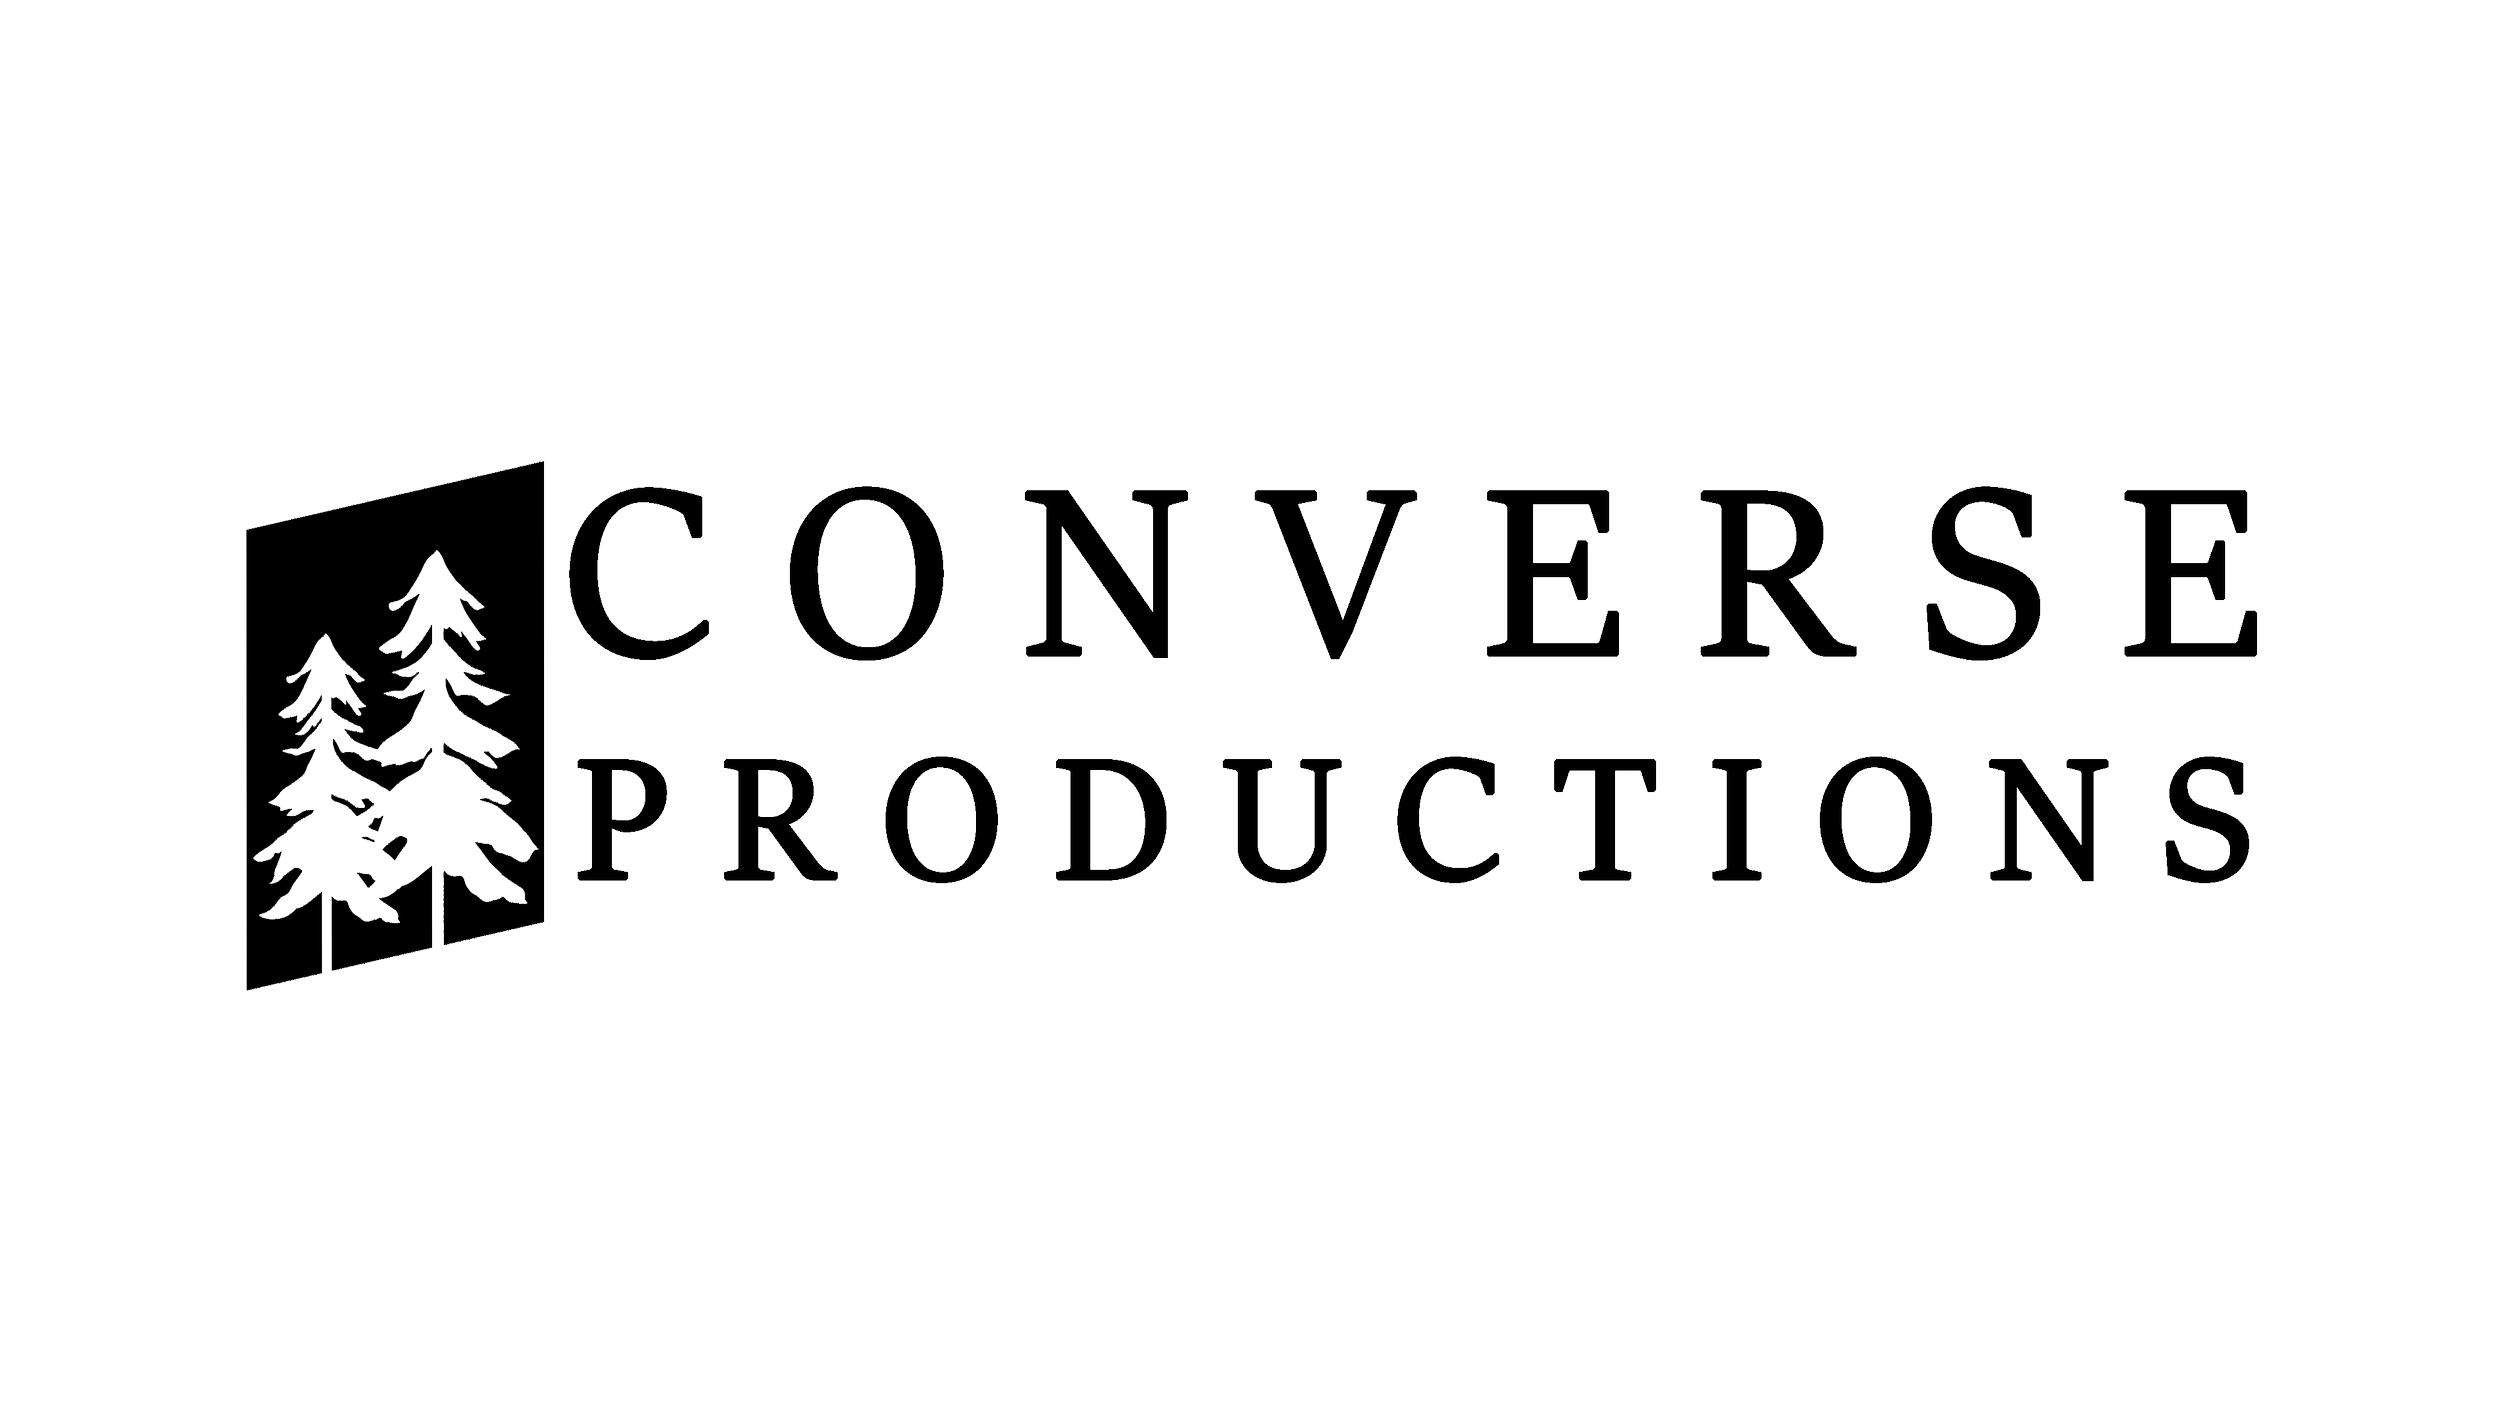  Converse Productions